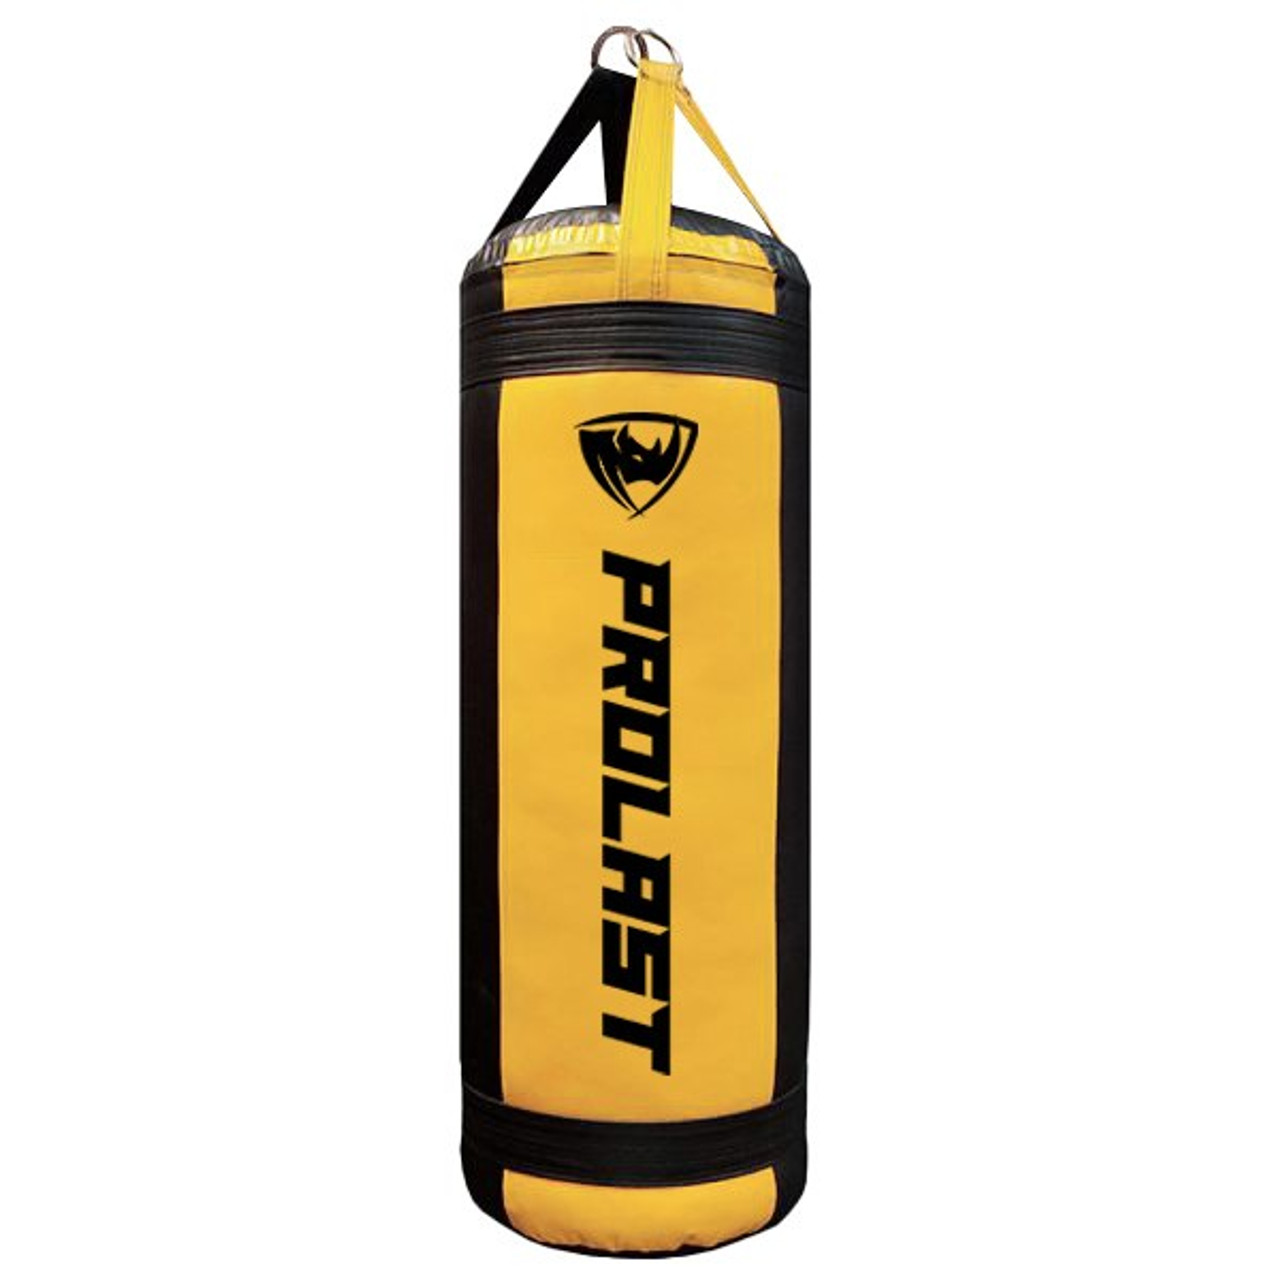 Prolast 4FT XL 135LB Mayweather Style Punching Bag Black // Yellow Made in USA